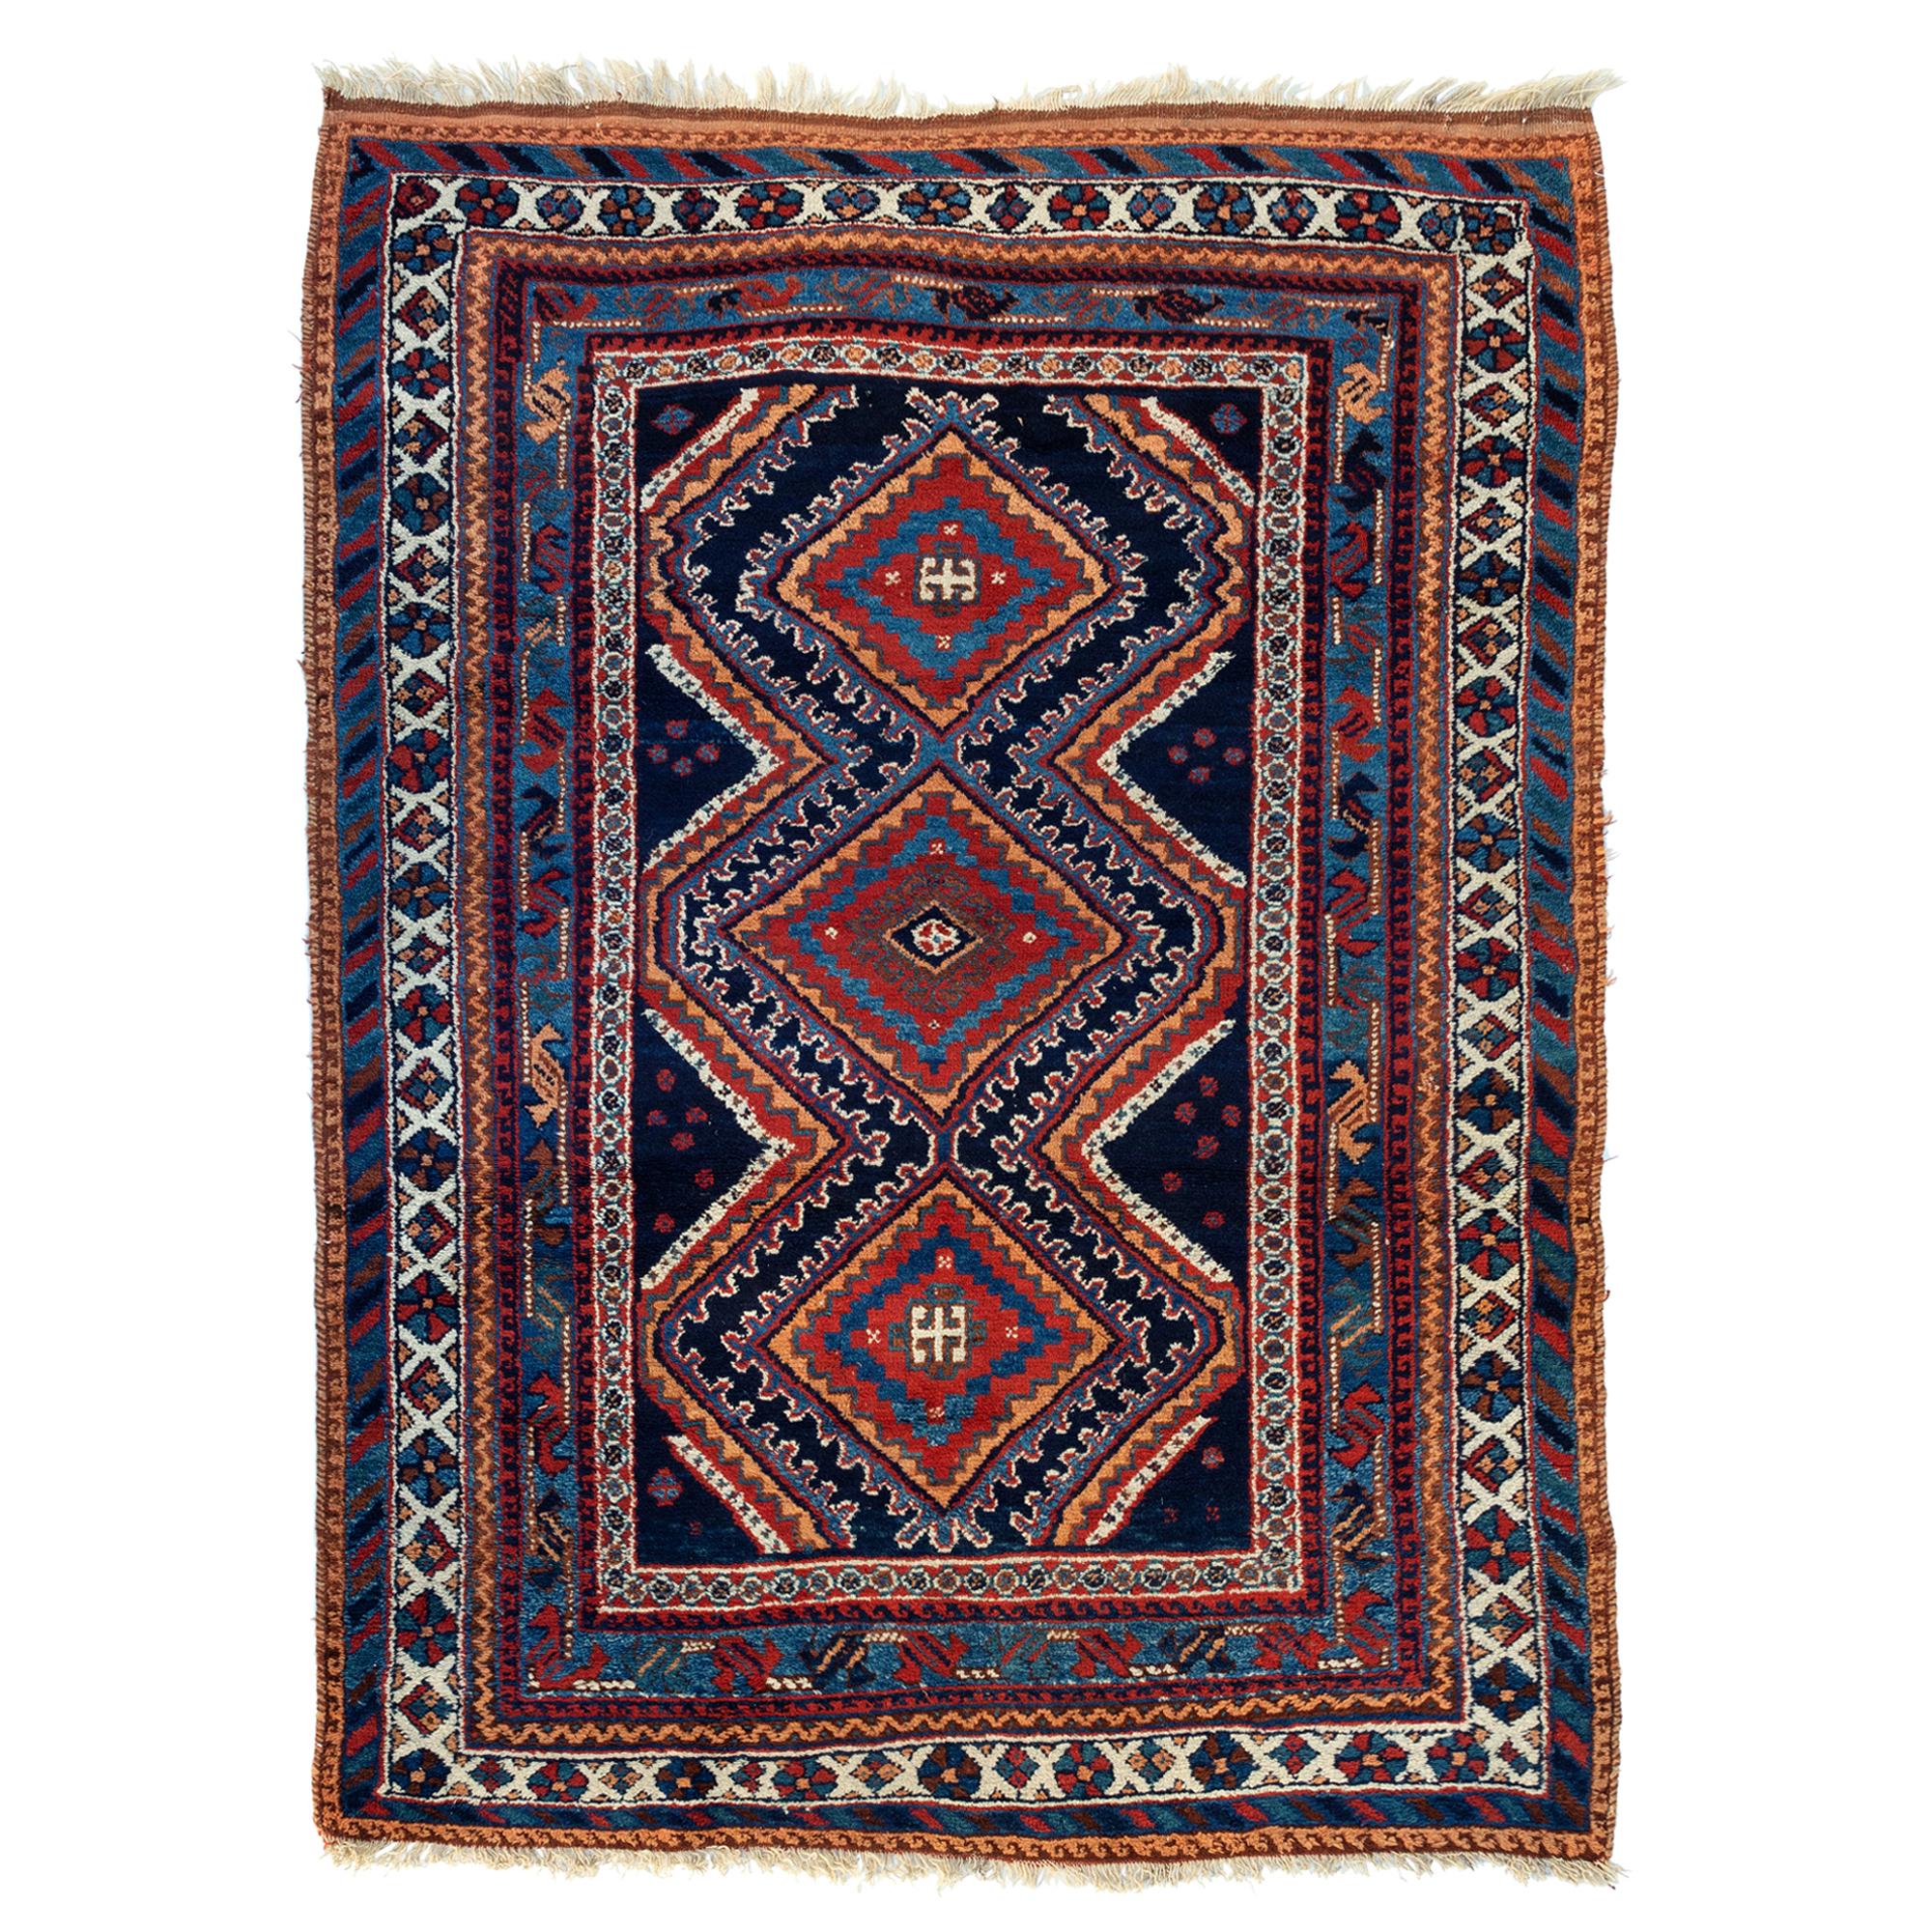 Vintage Red and Navy Blue Tribal Geometric Persian Afshar Rug, circa 1920s For Sale